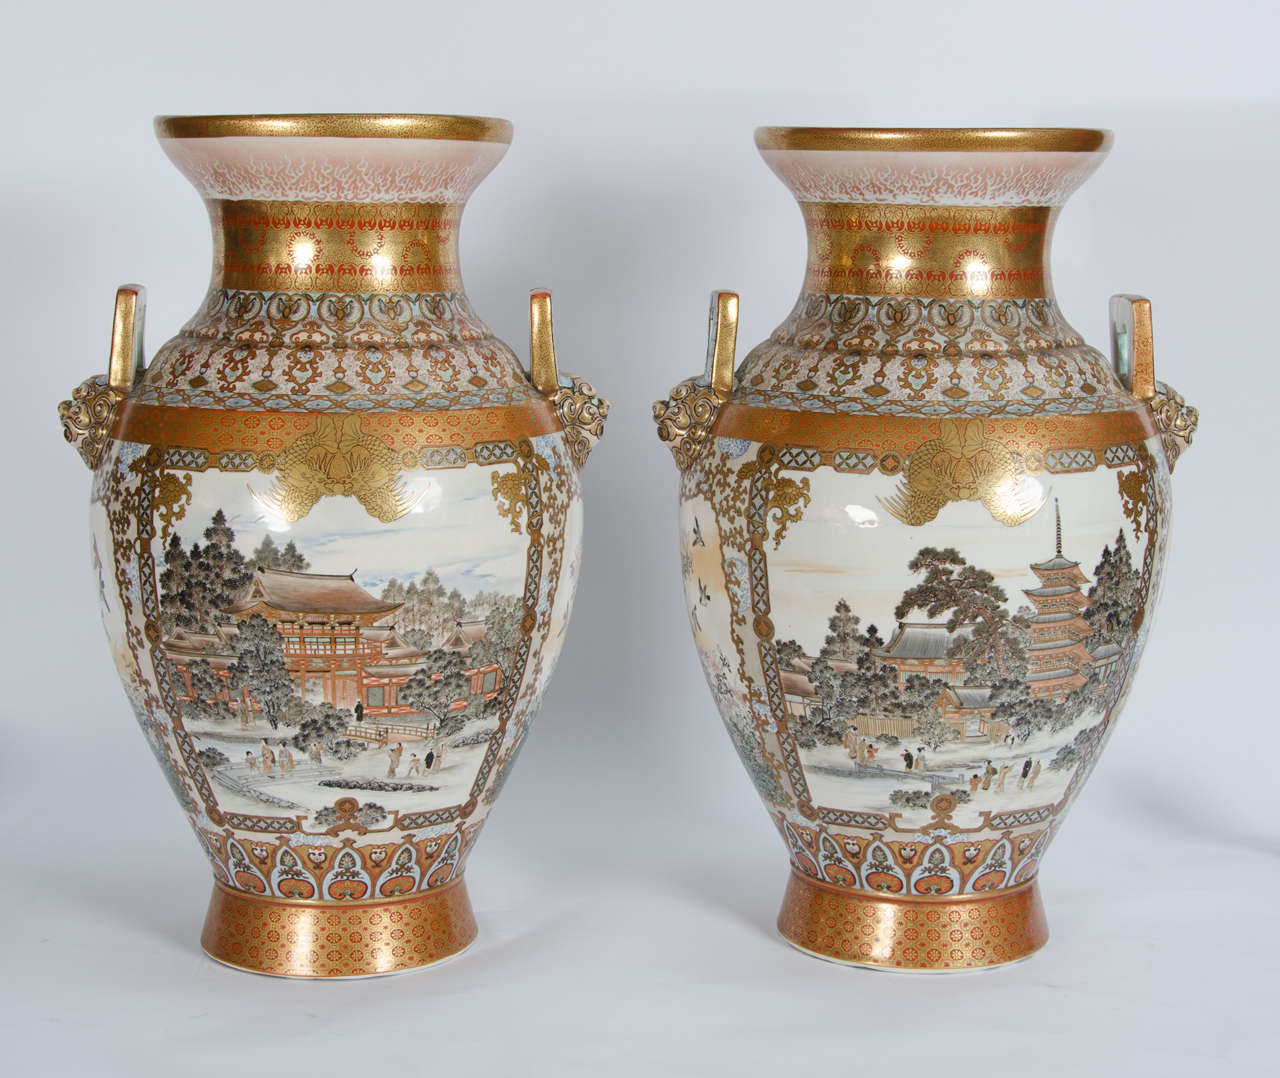 A fine quality large and impressive pair of Japanese Kutani vases, having Lion mask handles and scenes of women playing in the gardens.